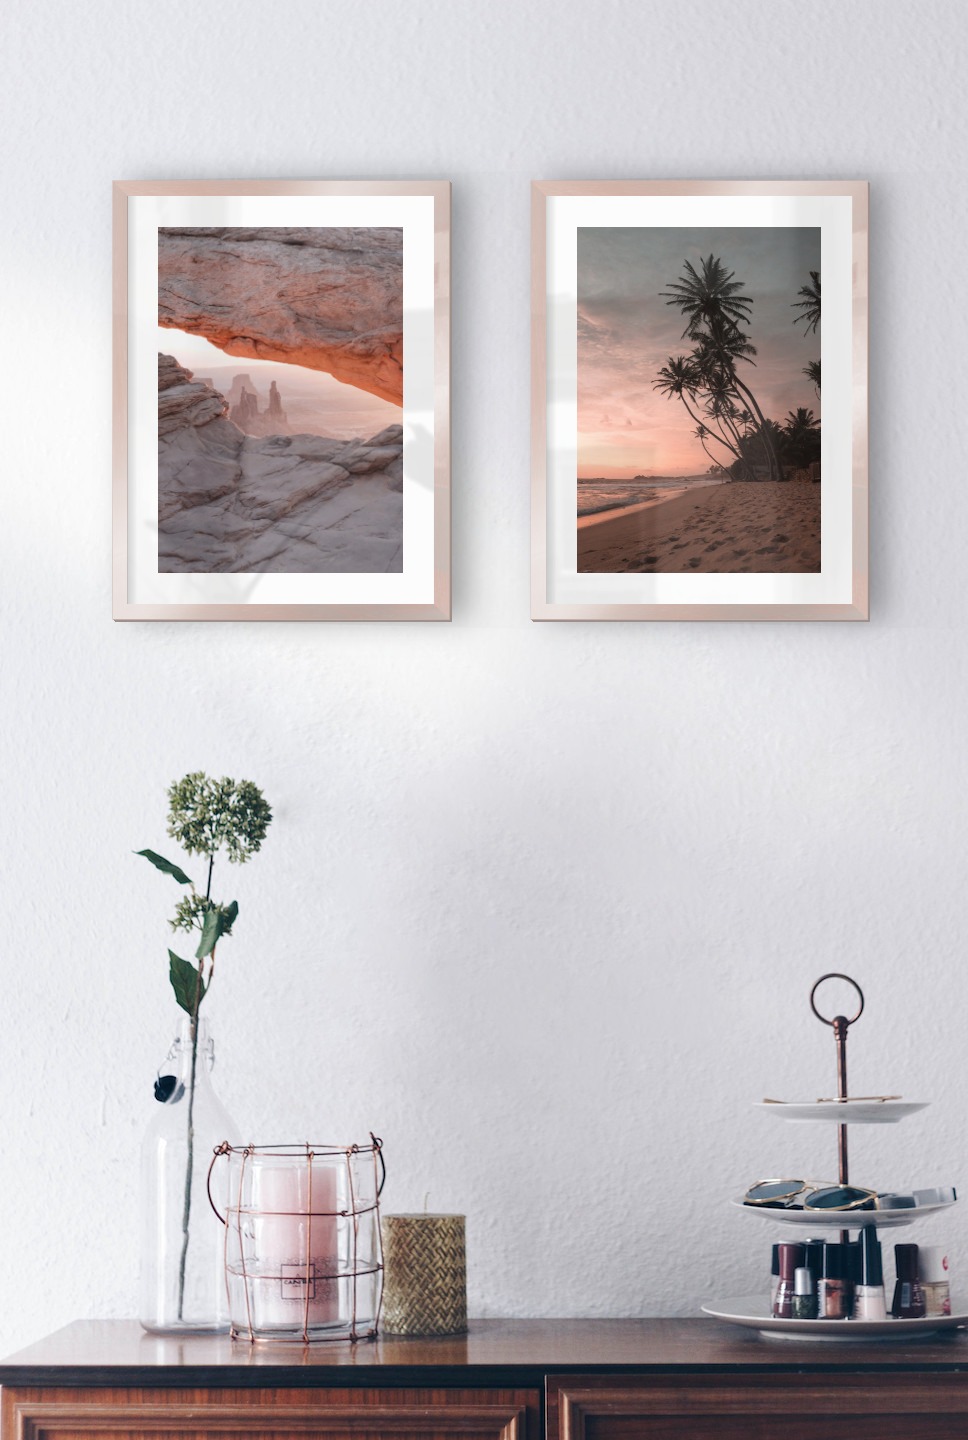 Gallery wall with picture frames in copper in sizes 30x40 with prints "View between cliffs" and "Beach at sunset"